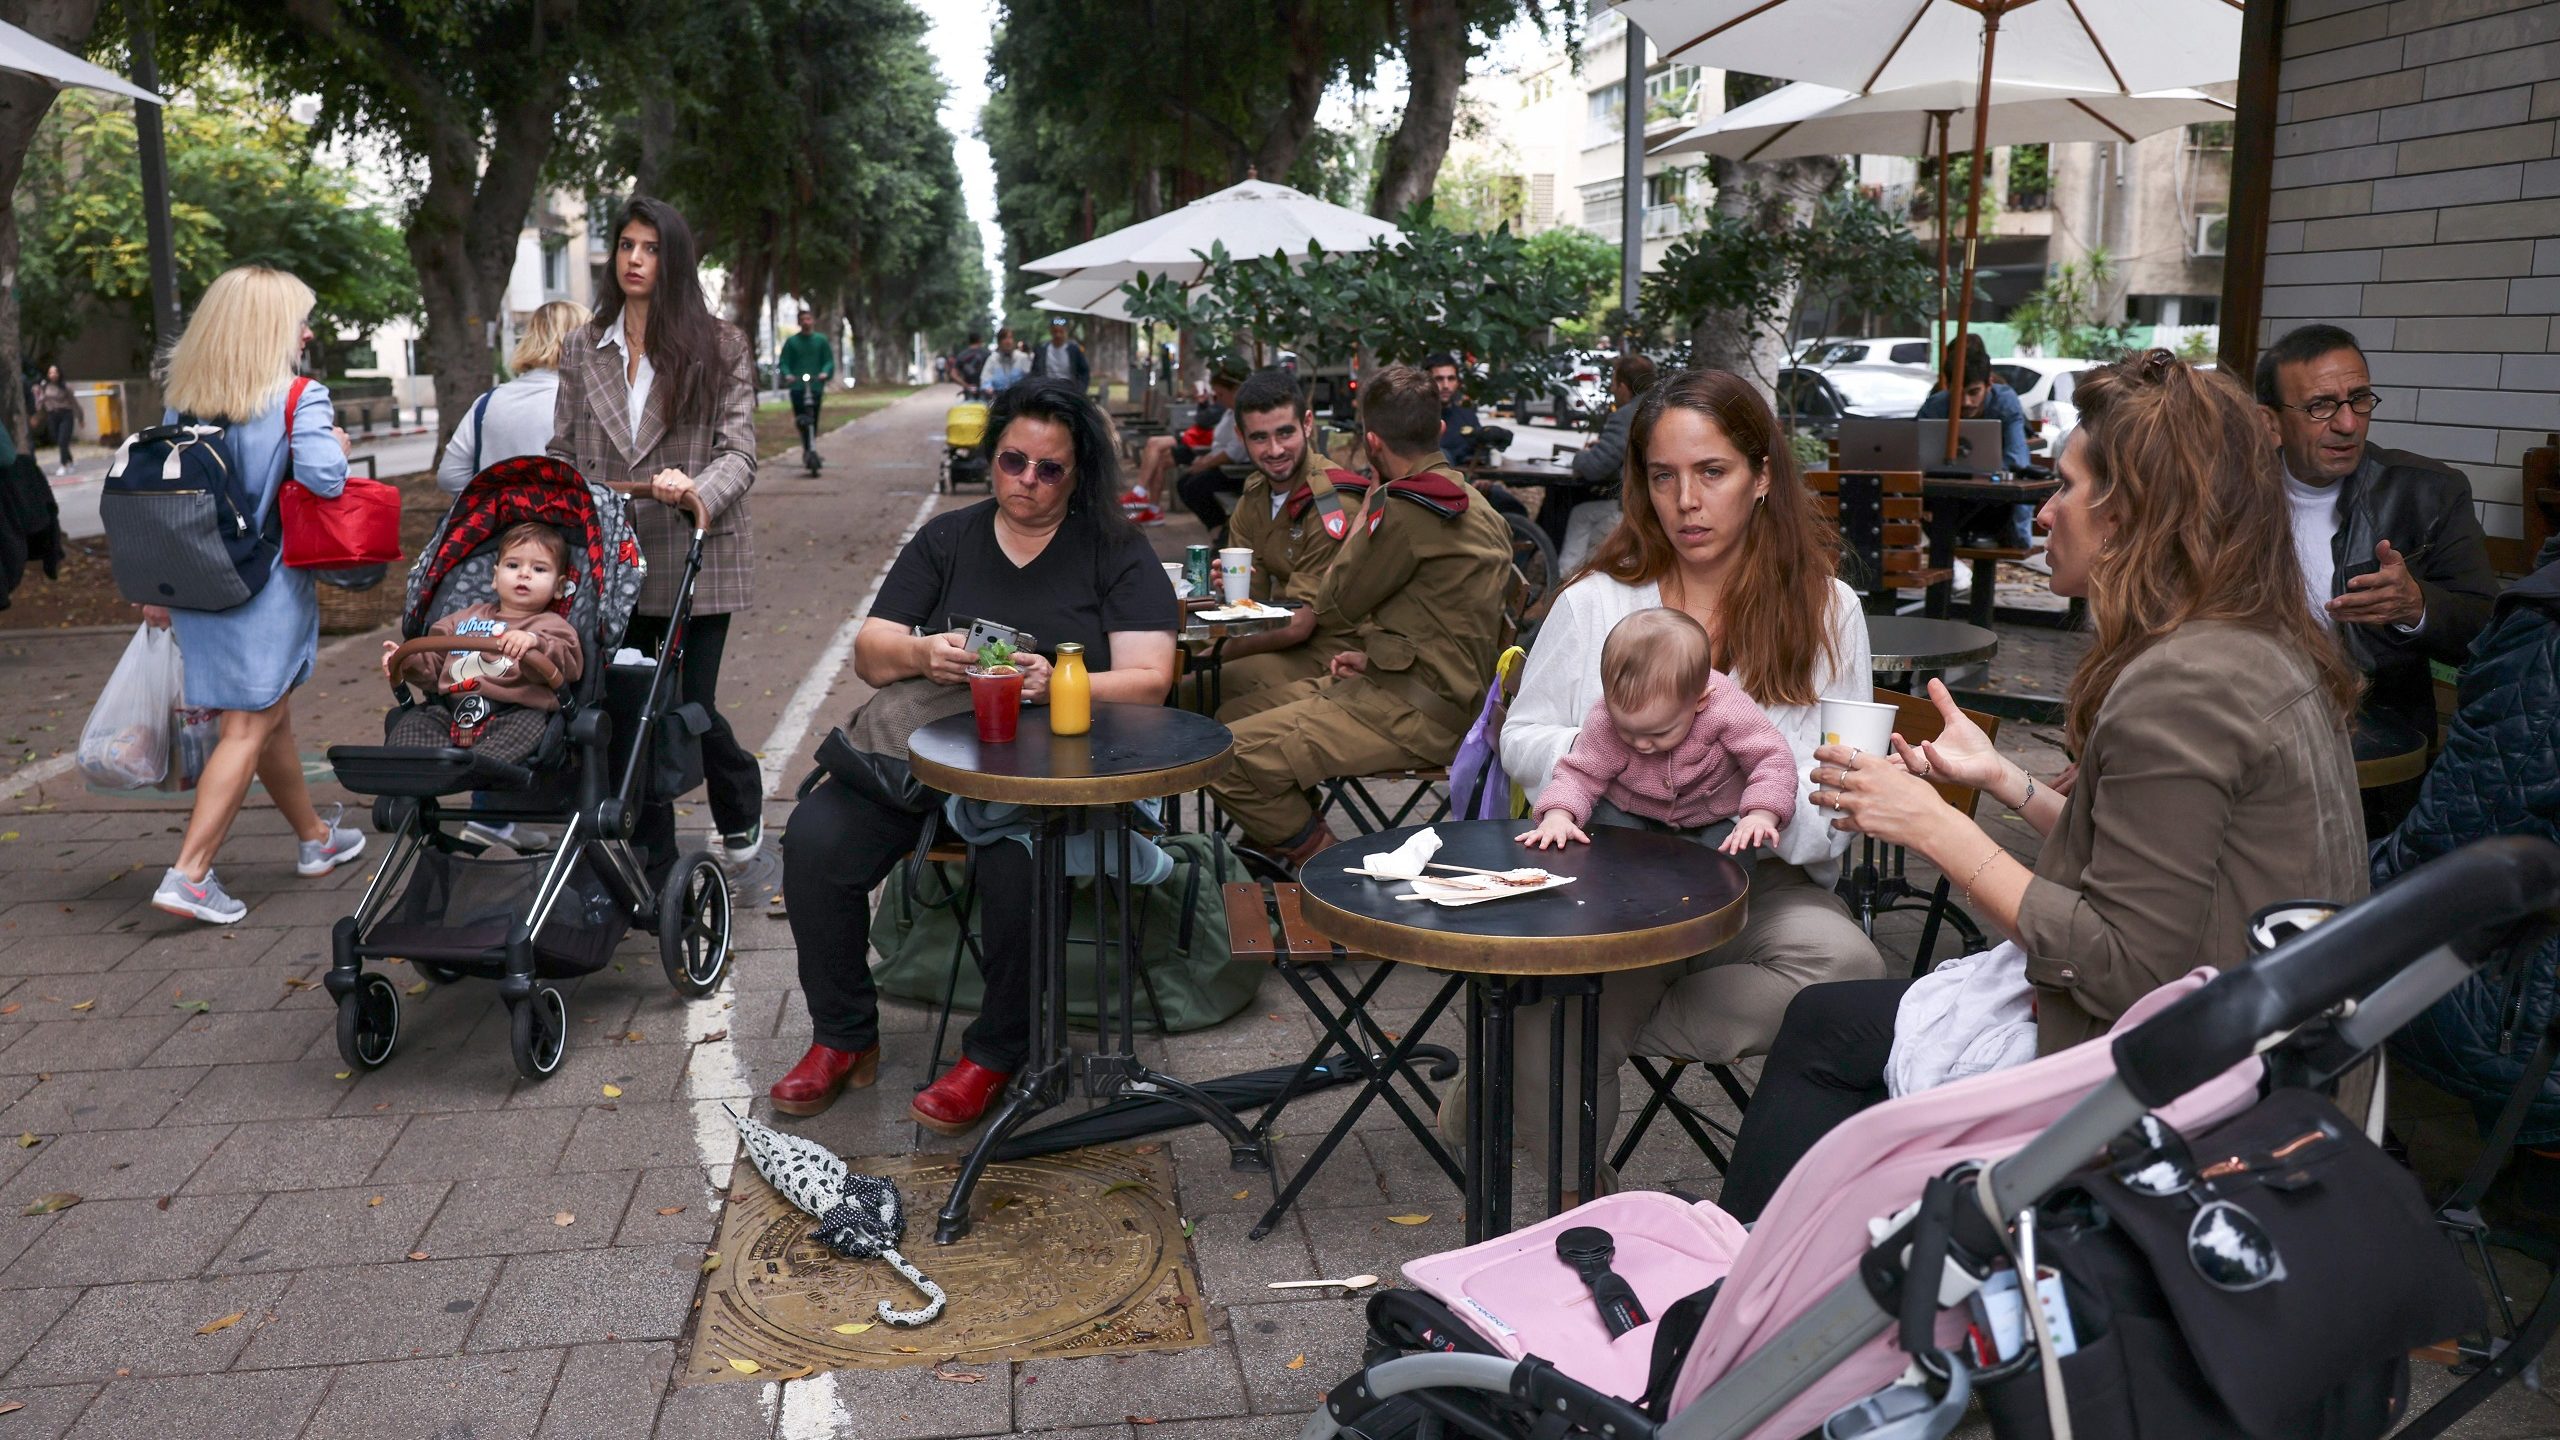 High Fertility Rates, Lackluster Education System Driving Cost of Living Up in Israel, Economist Says